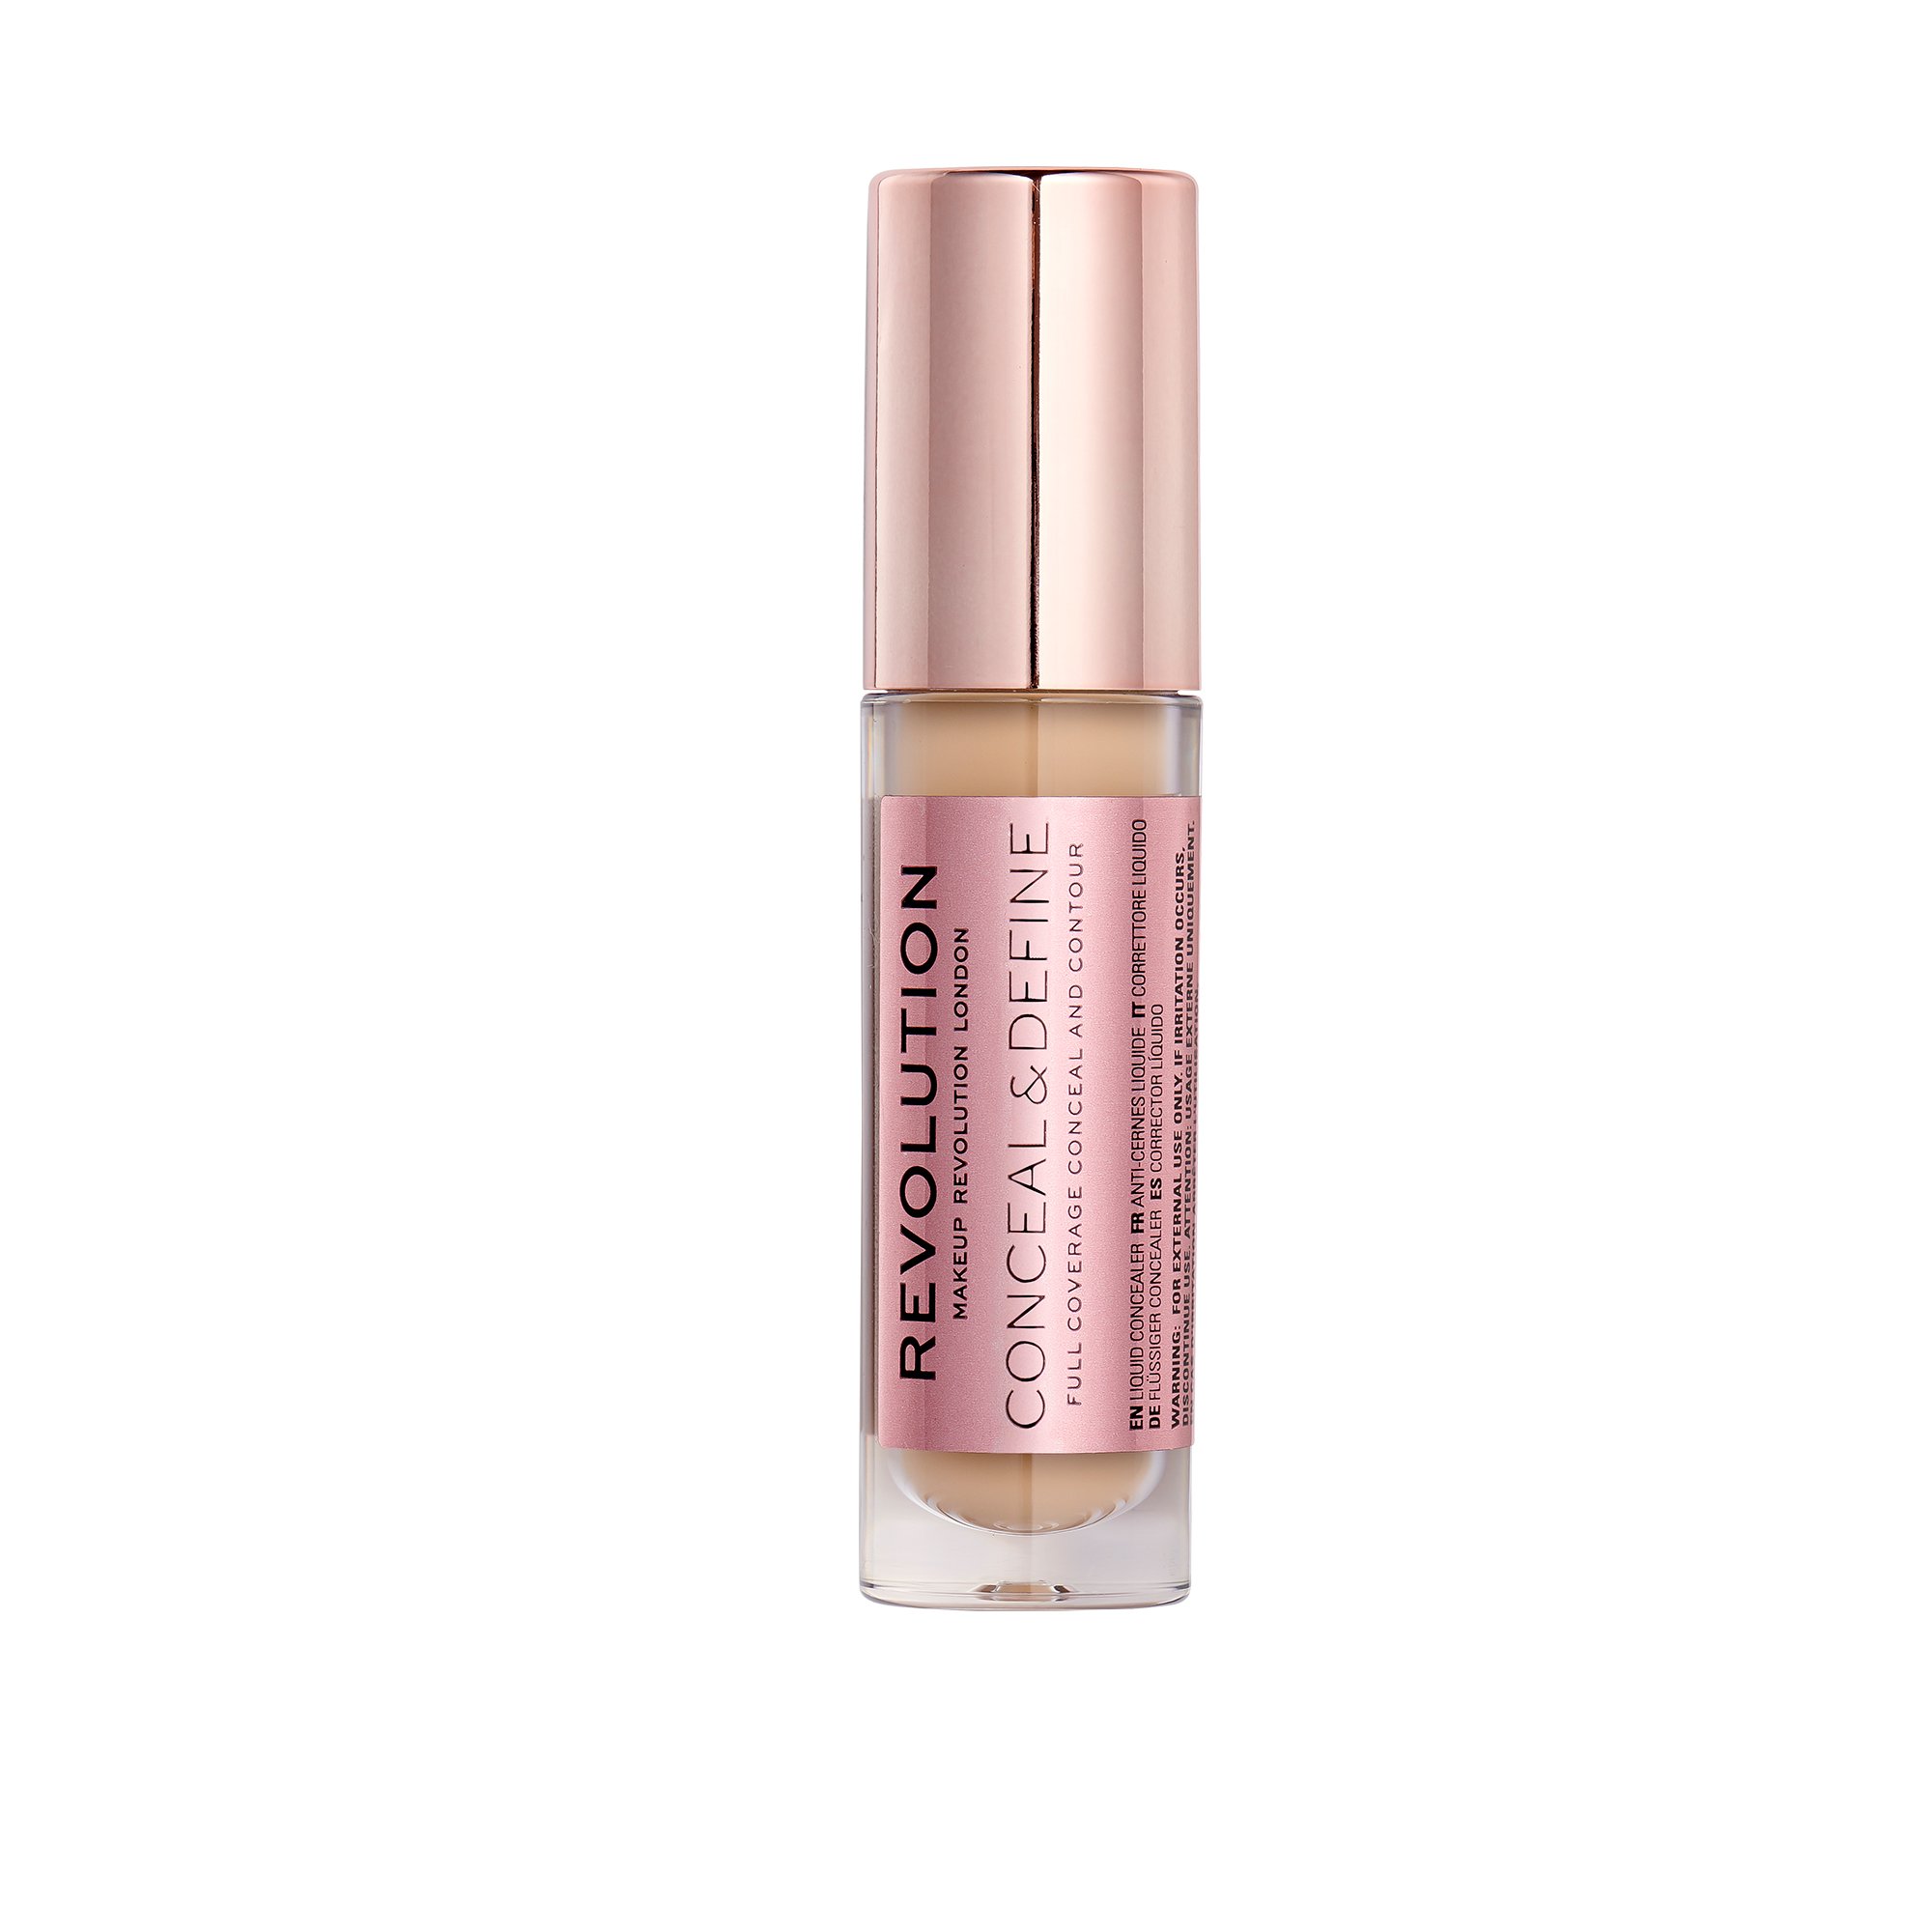 Makeup Revolution Conceal & Define Full Coverage Conceal and Contour C7 ...